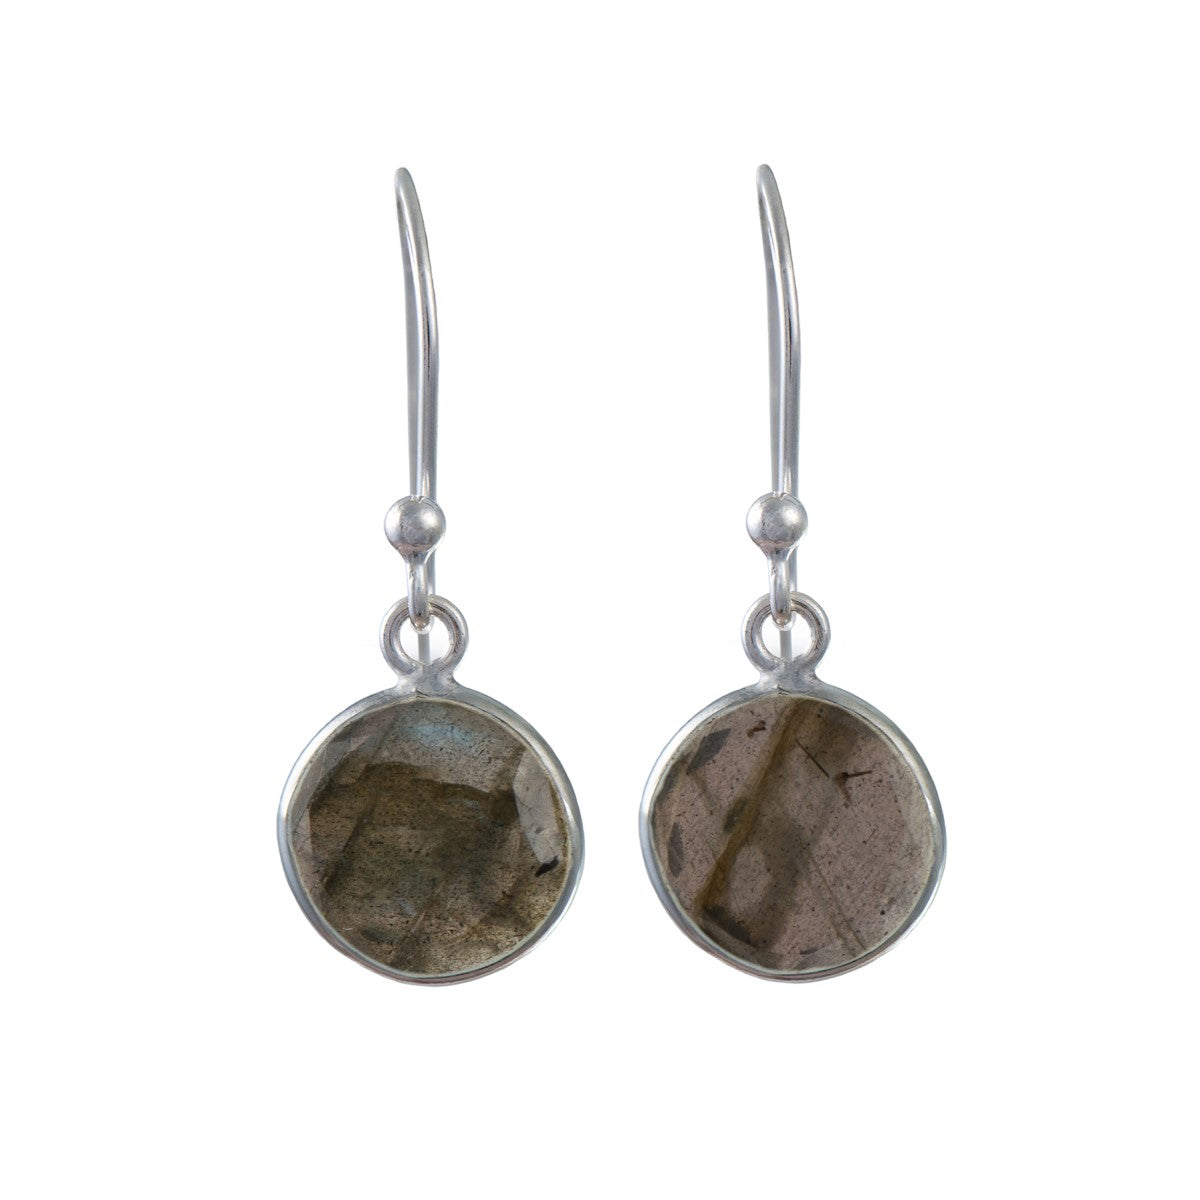 Labradorite Sterling Silver Earrings with a Round Faceted Gemstone Drop